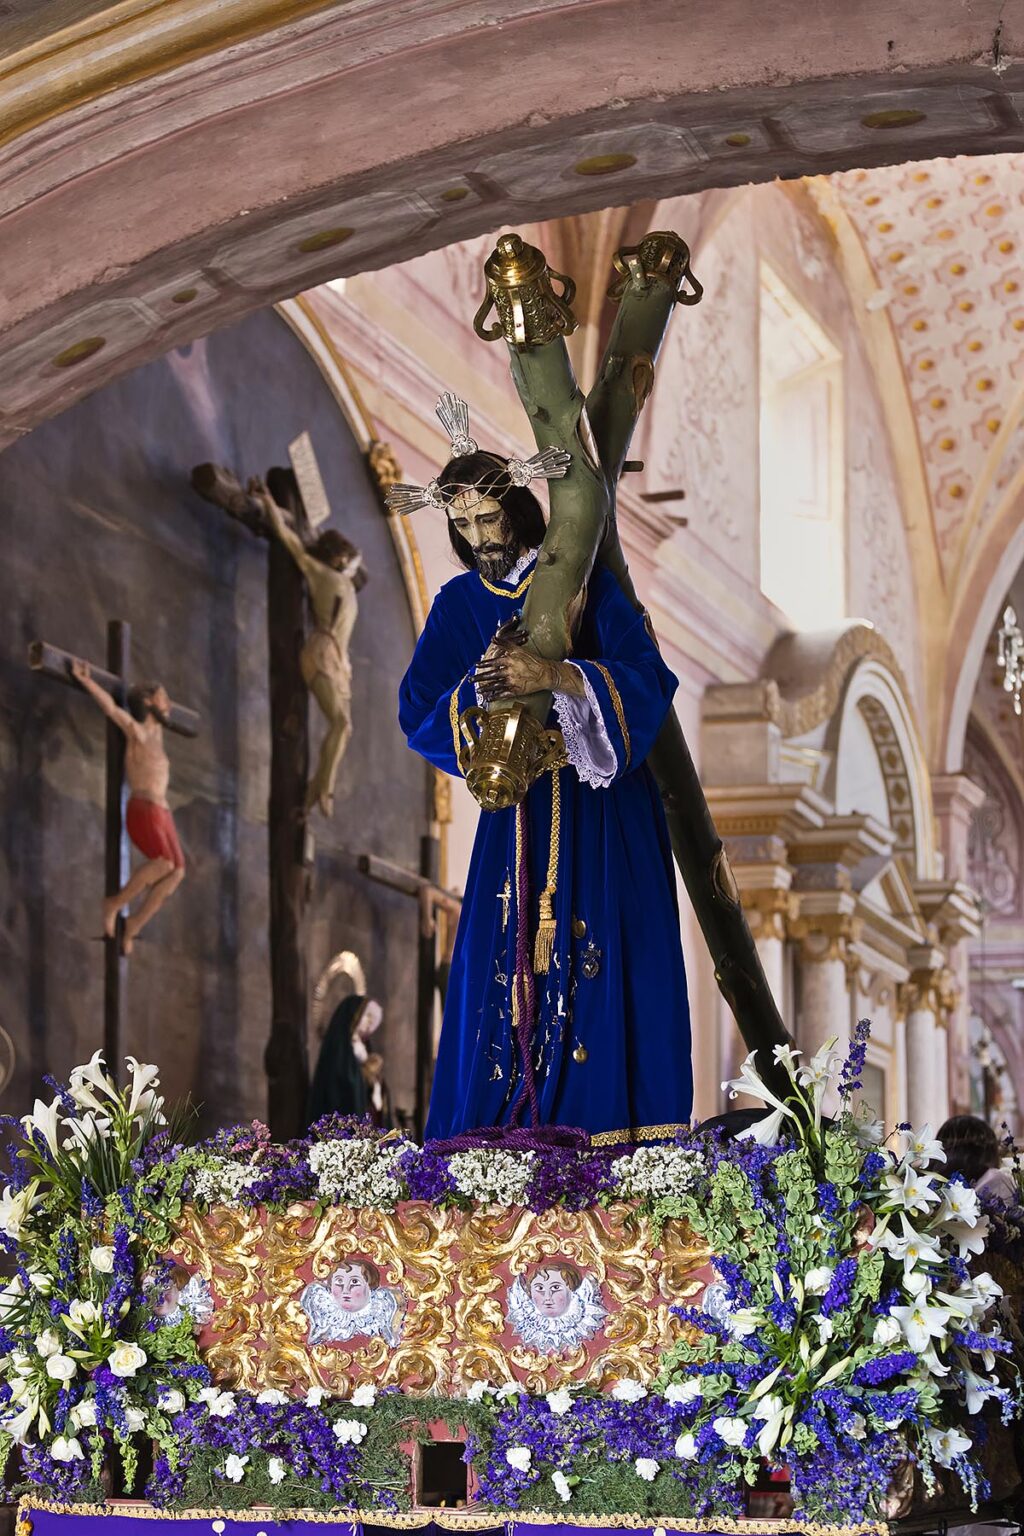 A statue of Jesus carring the cross is brought out for the Good Friday Procession (Santa Entierro) at the ORATORIO CHURCH - SAN MIGUEL DE ALLENDE, MEXICO